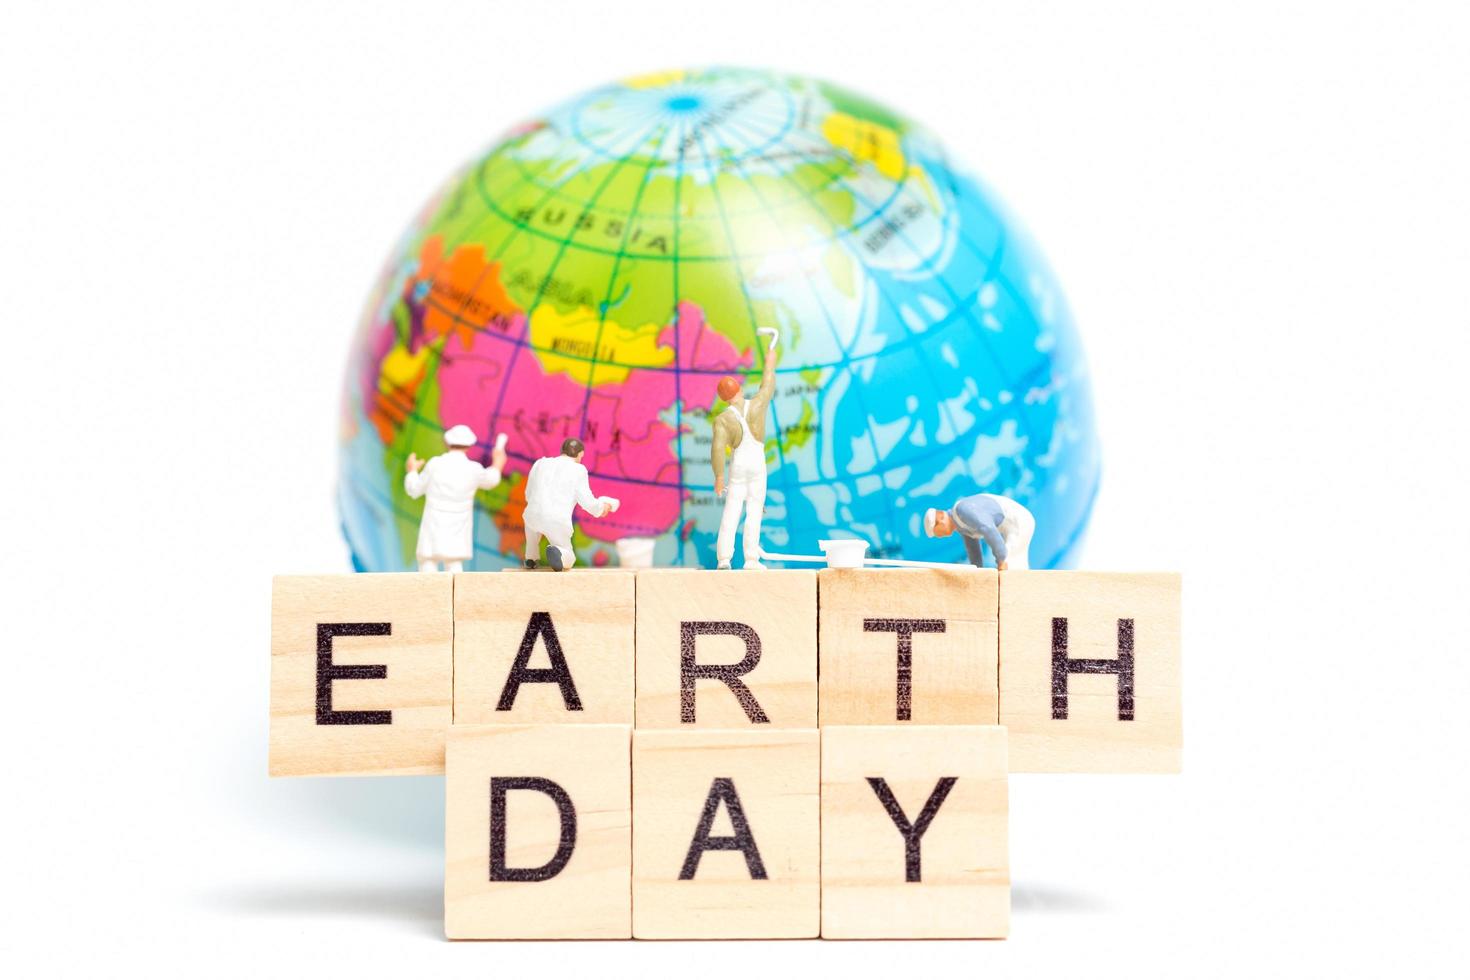 Miniature painters painting on a globe with wooden blocks showing Earth Day on a white background, Earth Day concept photo